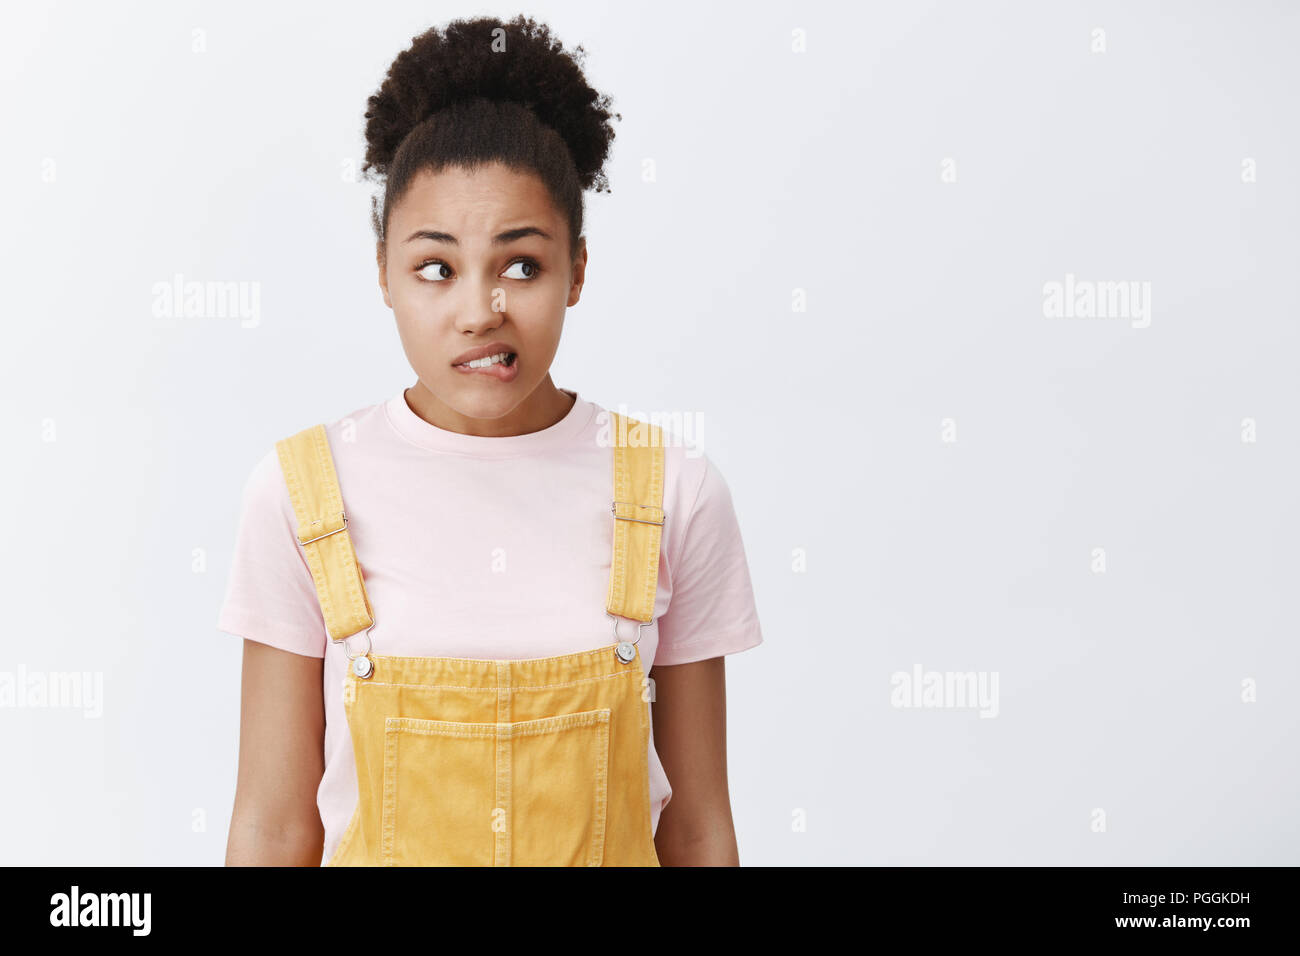 Woman feeling guilty, wanting say sorry. Portrait of nervous and worried cute African American girl in yellow overalls, biting lip and gazing anxiously right, standing over gray background Stock Photo